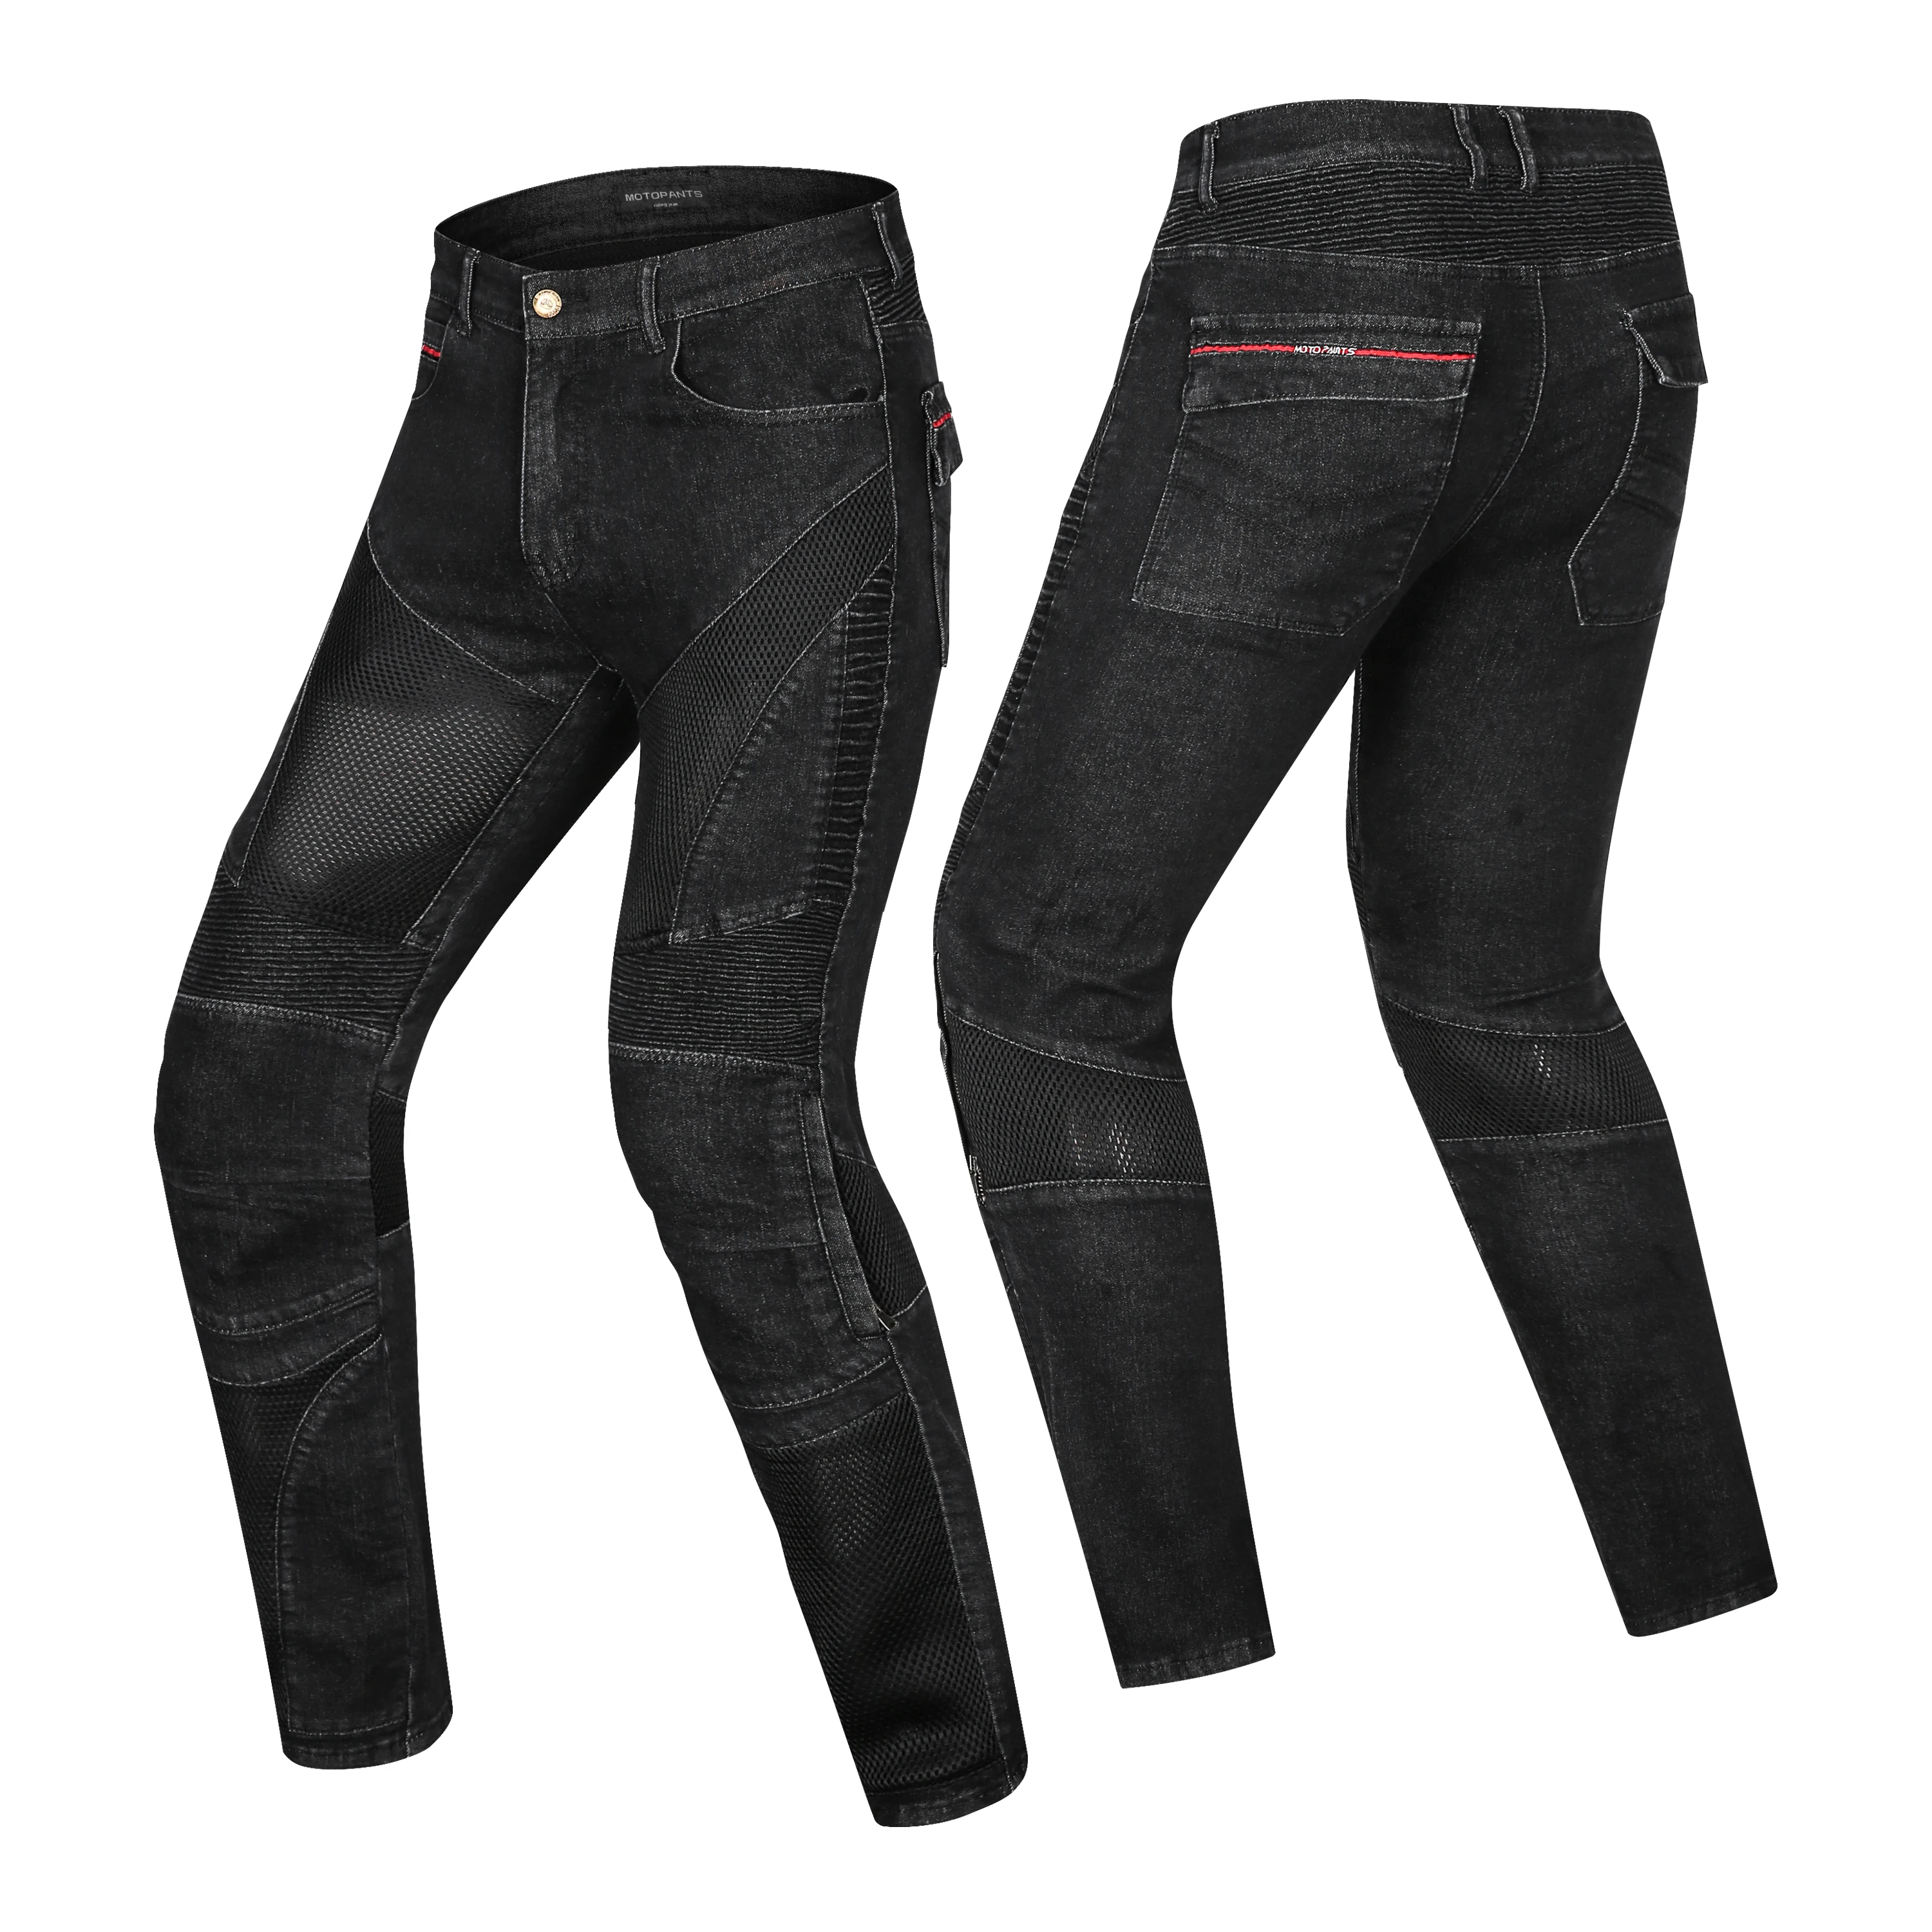 New motorcycle riding pants men's motorcycle pants fall-resistant four seasons racing handsome slim jeans